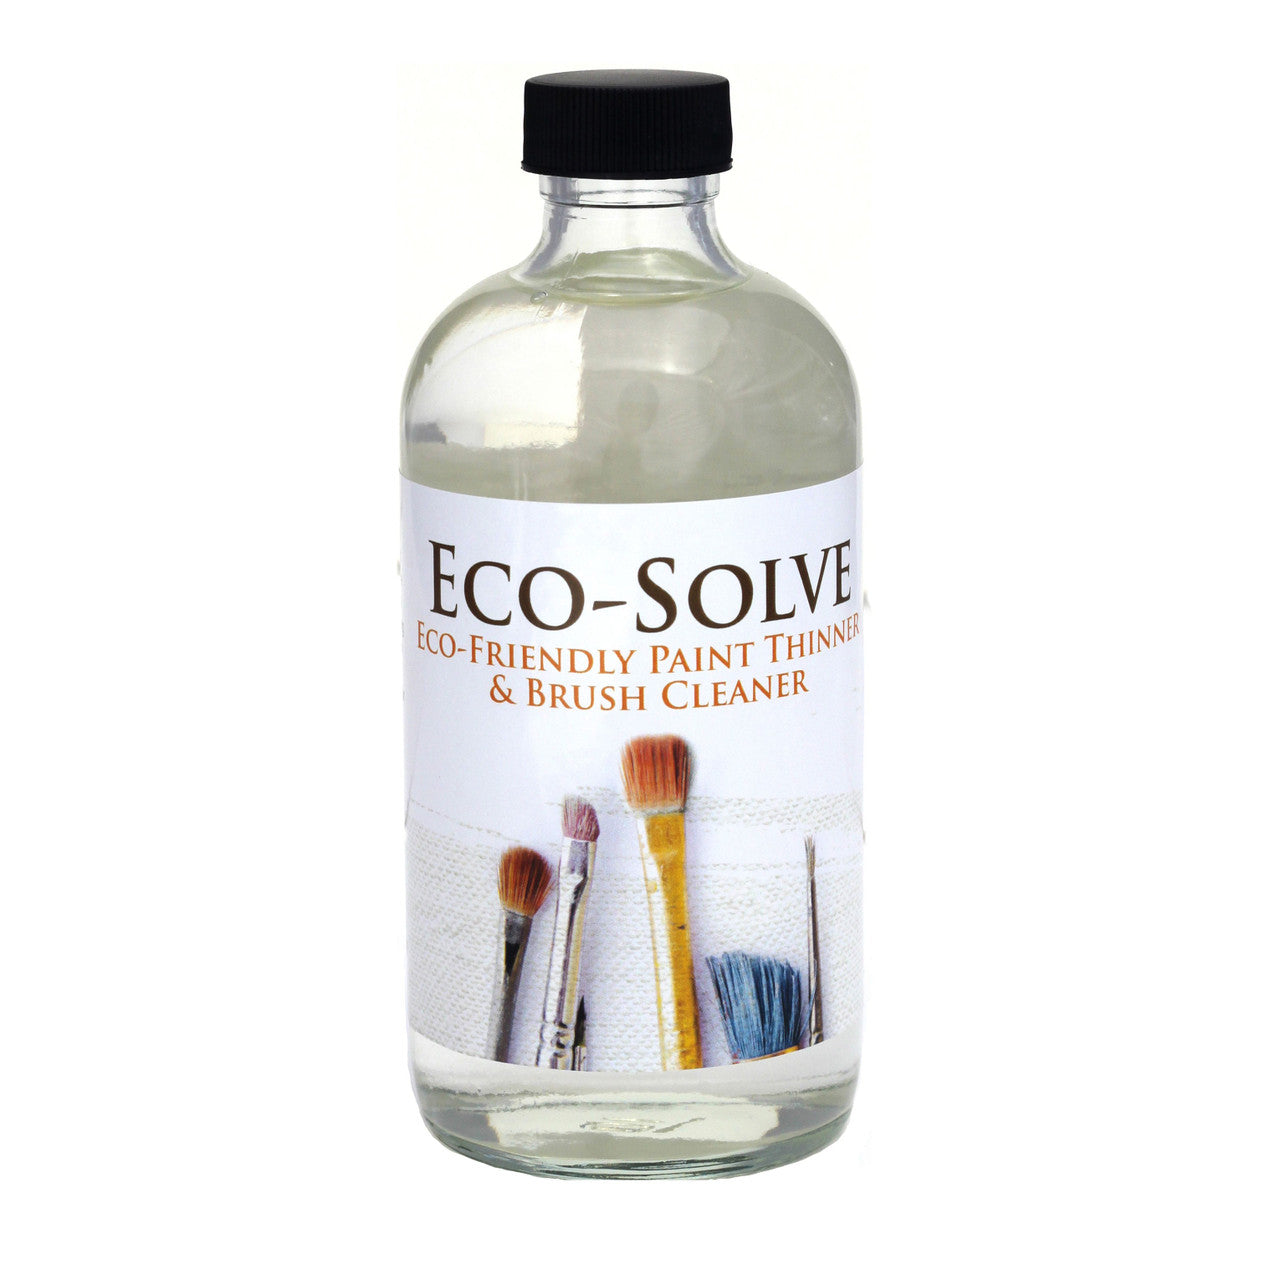 All-Natural Eco-Solve